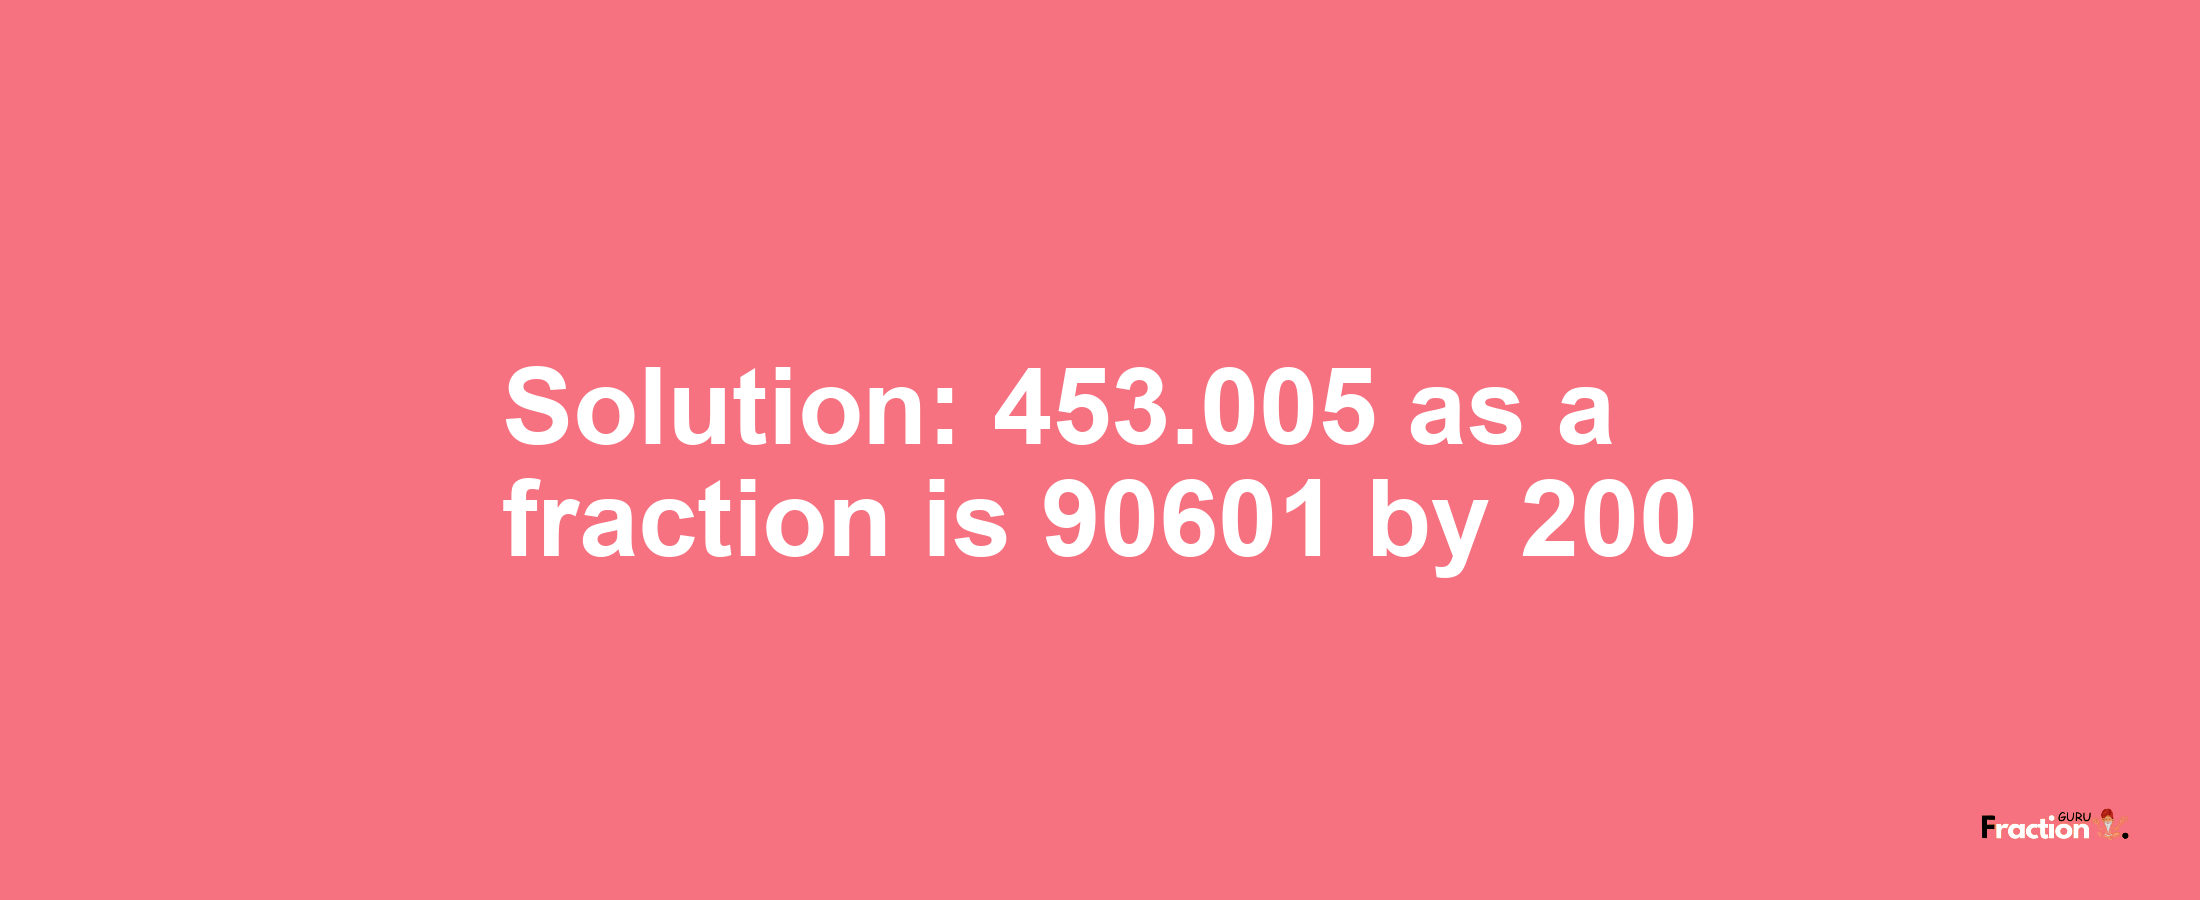 Solution:453.005 as a fraction is 90601/200